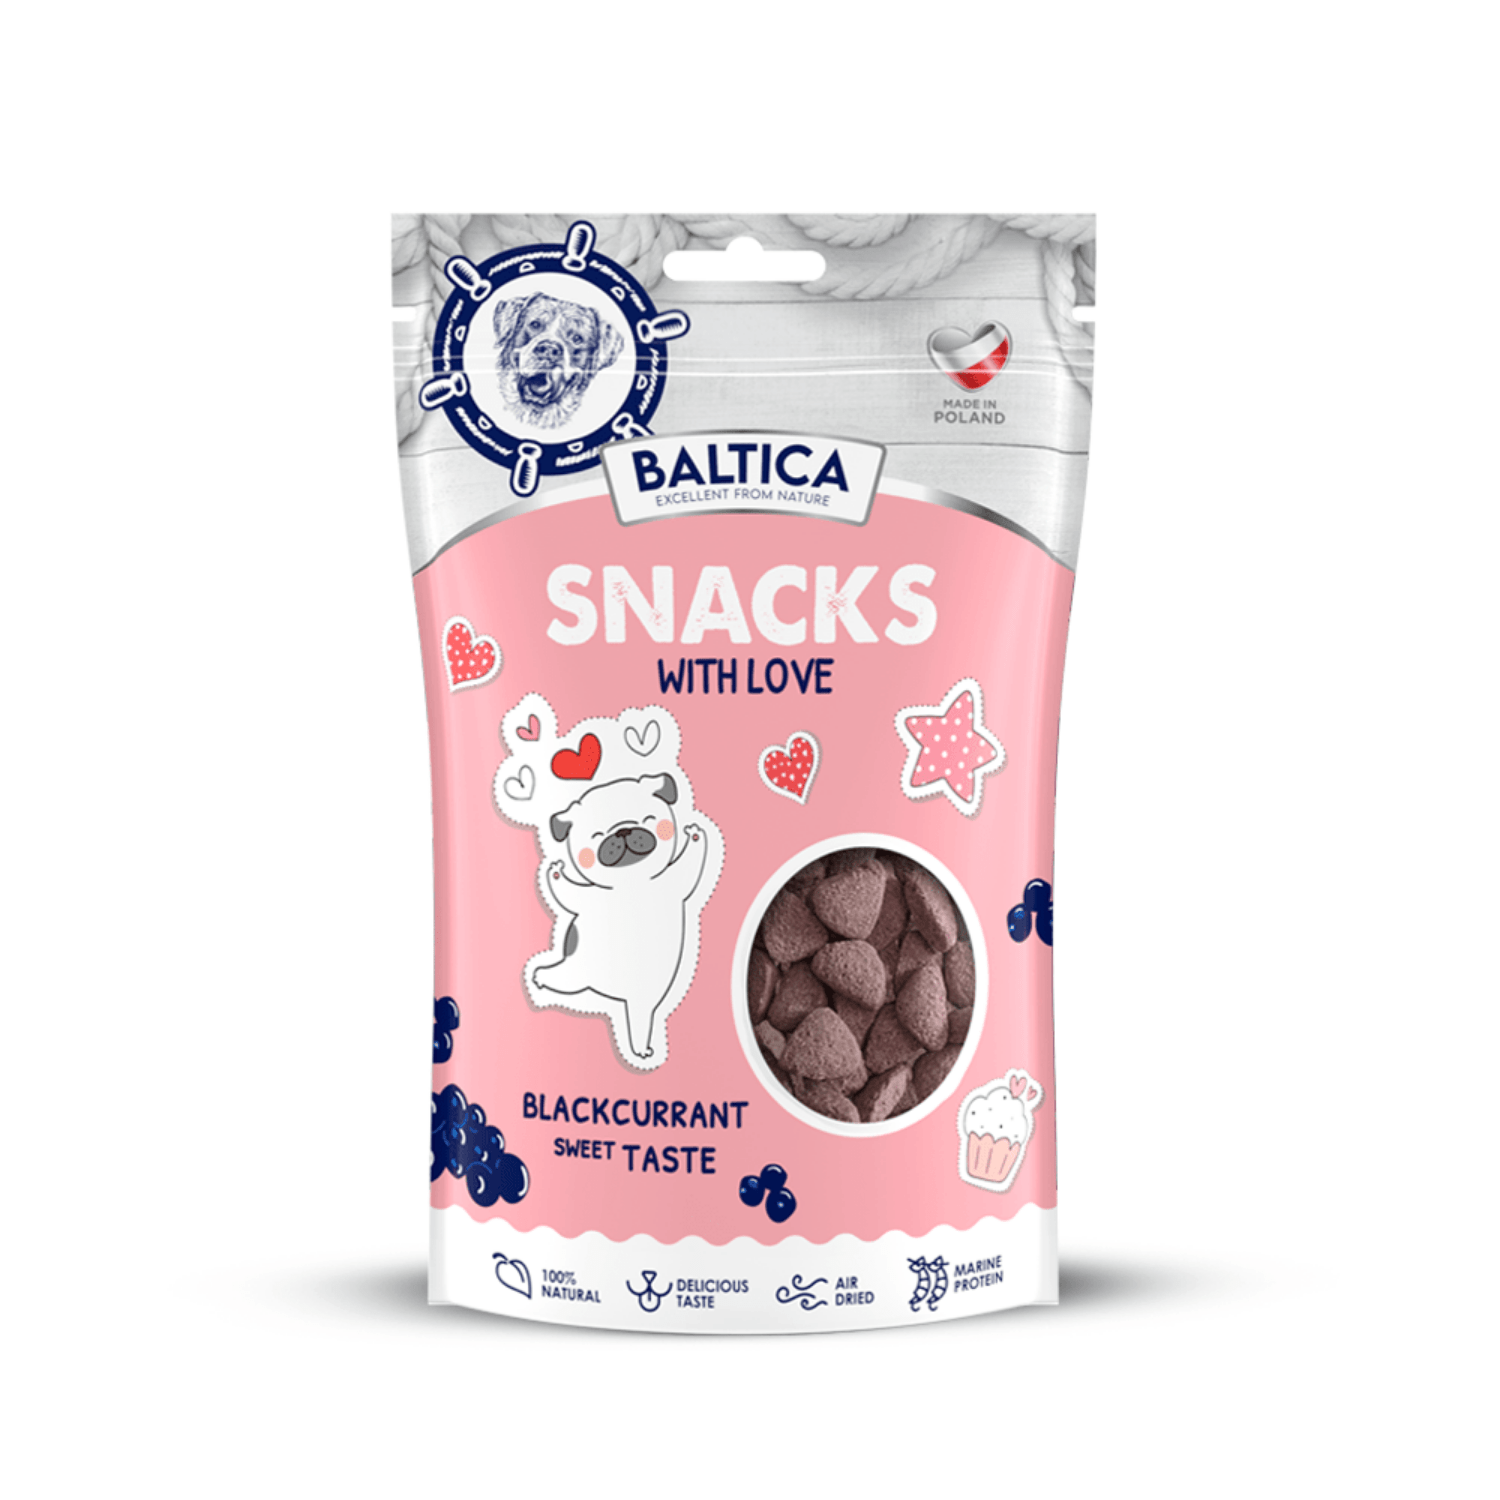 Baltica Snacks with Love 150g